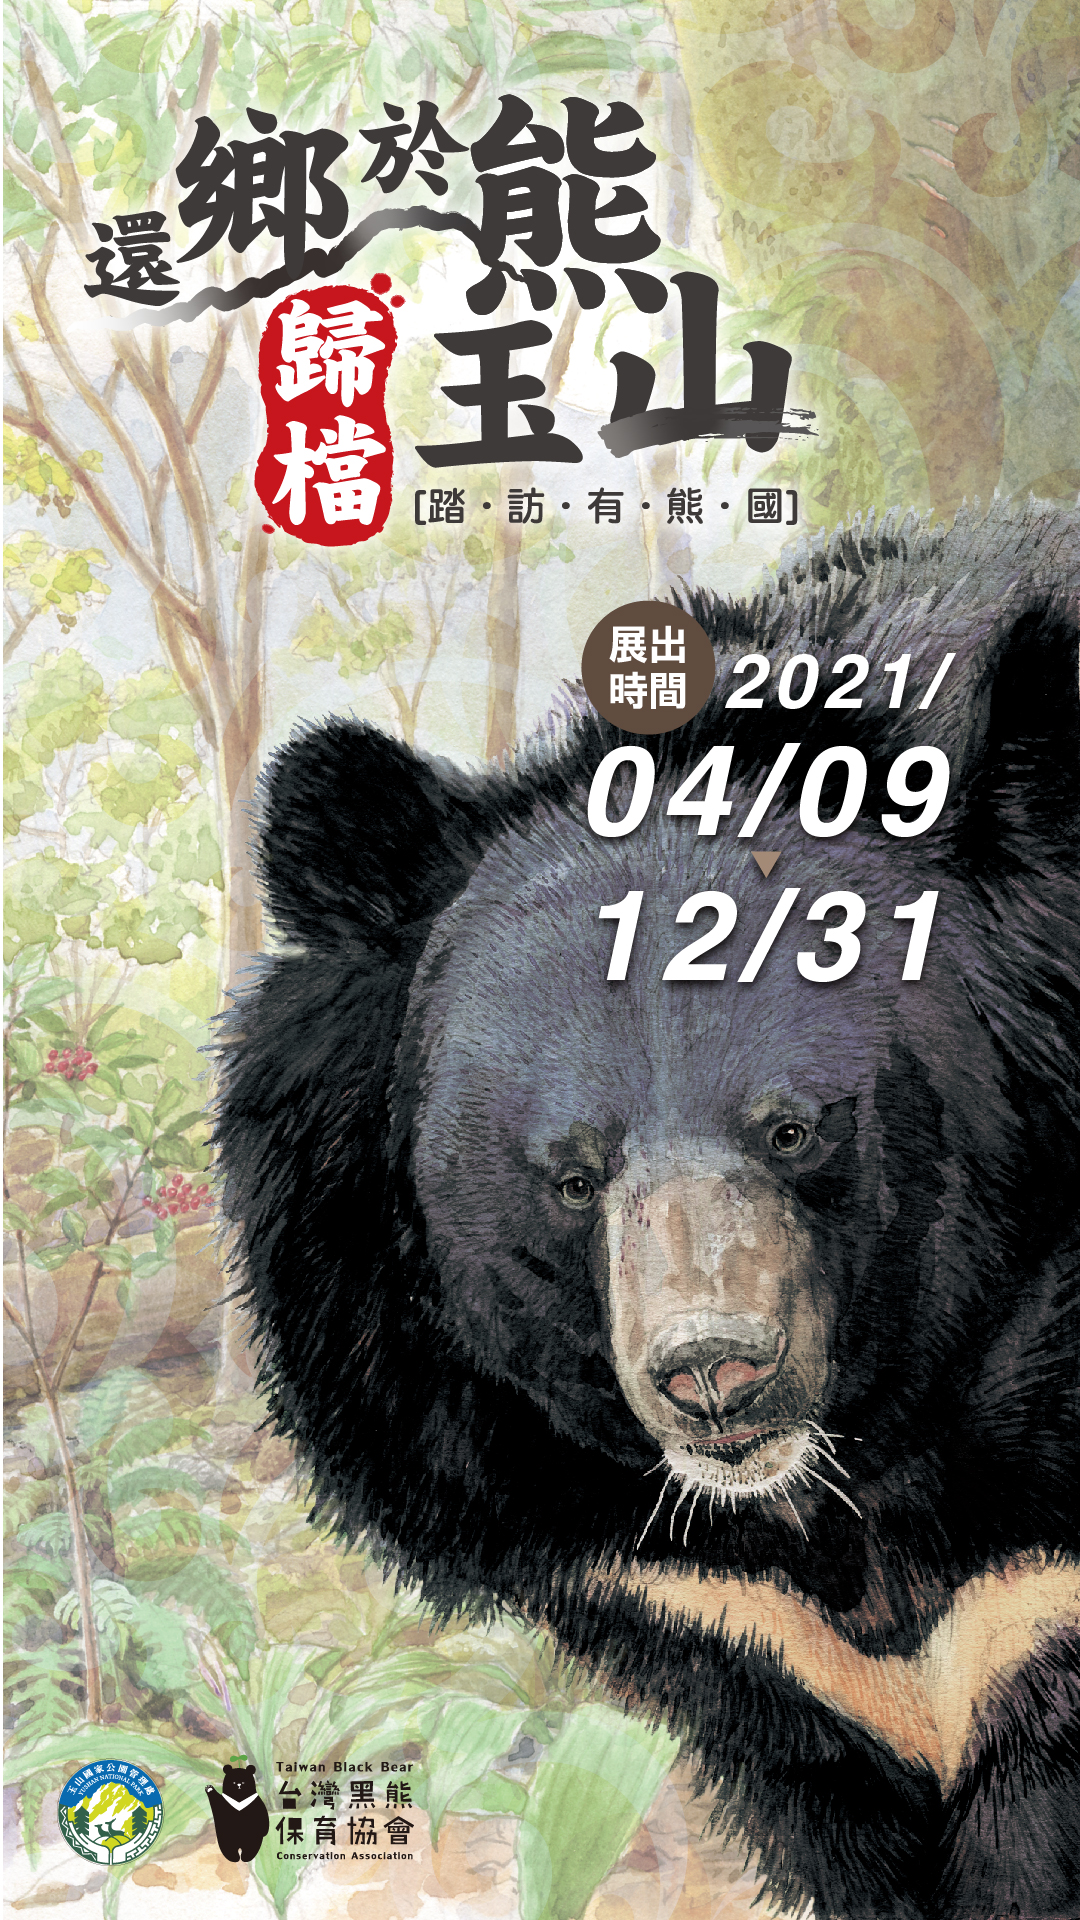 “Giving the Bears Back Their Homeland, Returning to Yushan and Visiting the Kingdom of Bears”special exhibition posters will run from April 9th to December 31st.